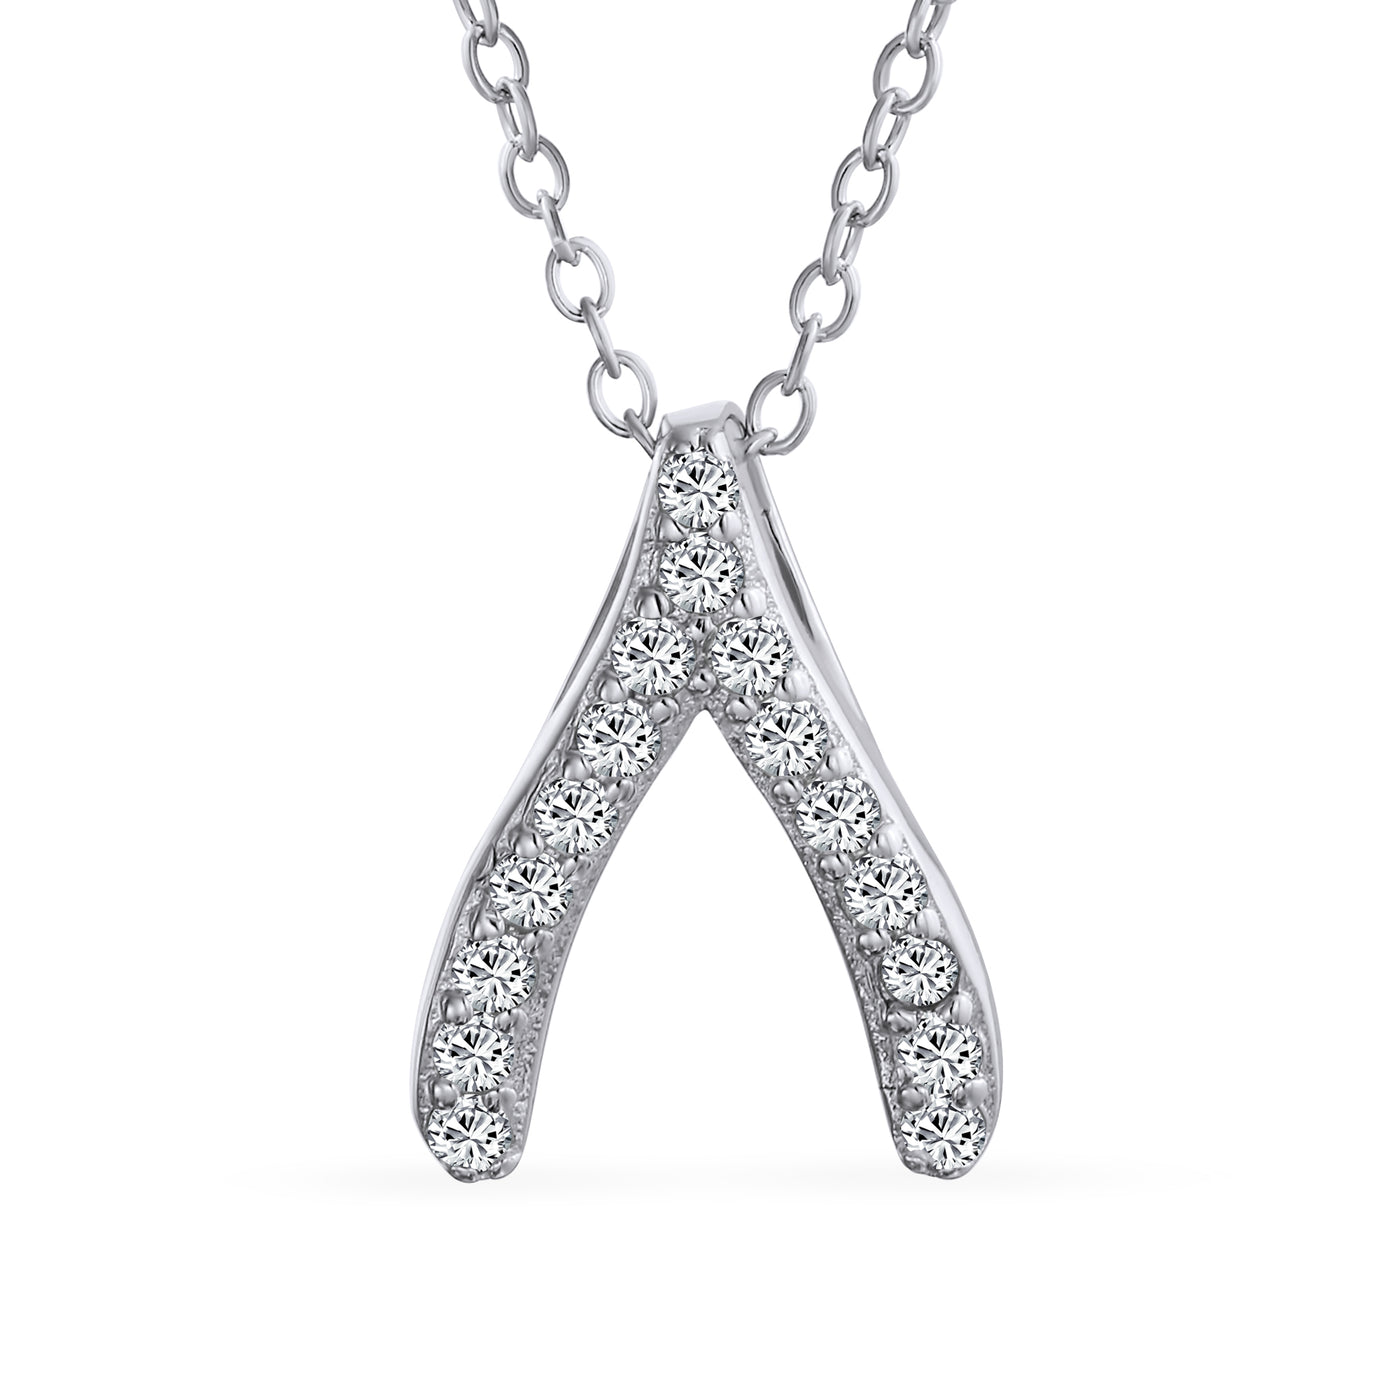 Solid Sterling Silver Good Luck Charm Wish Bone Pave Pendant Necklace